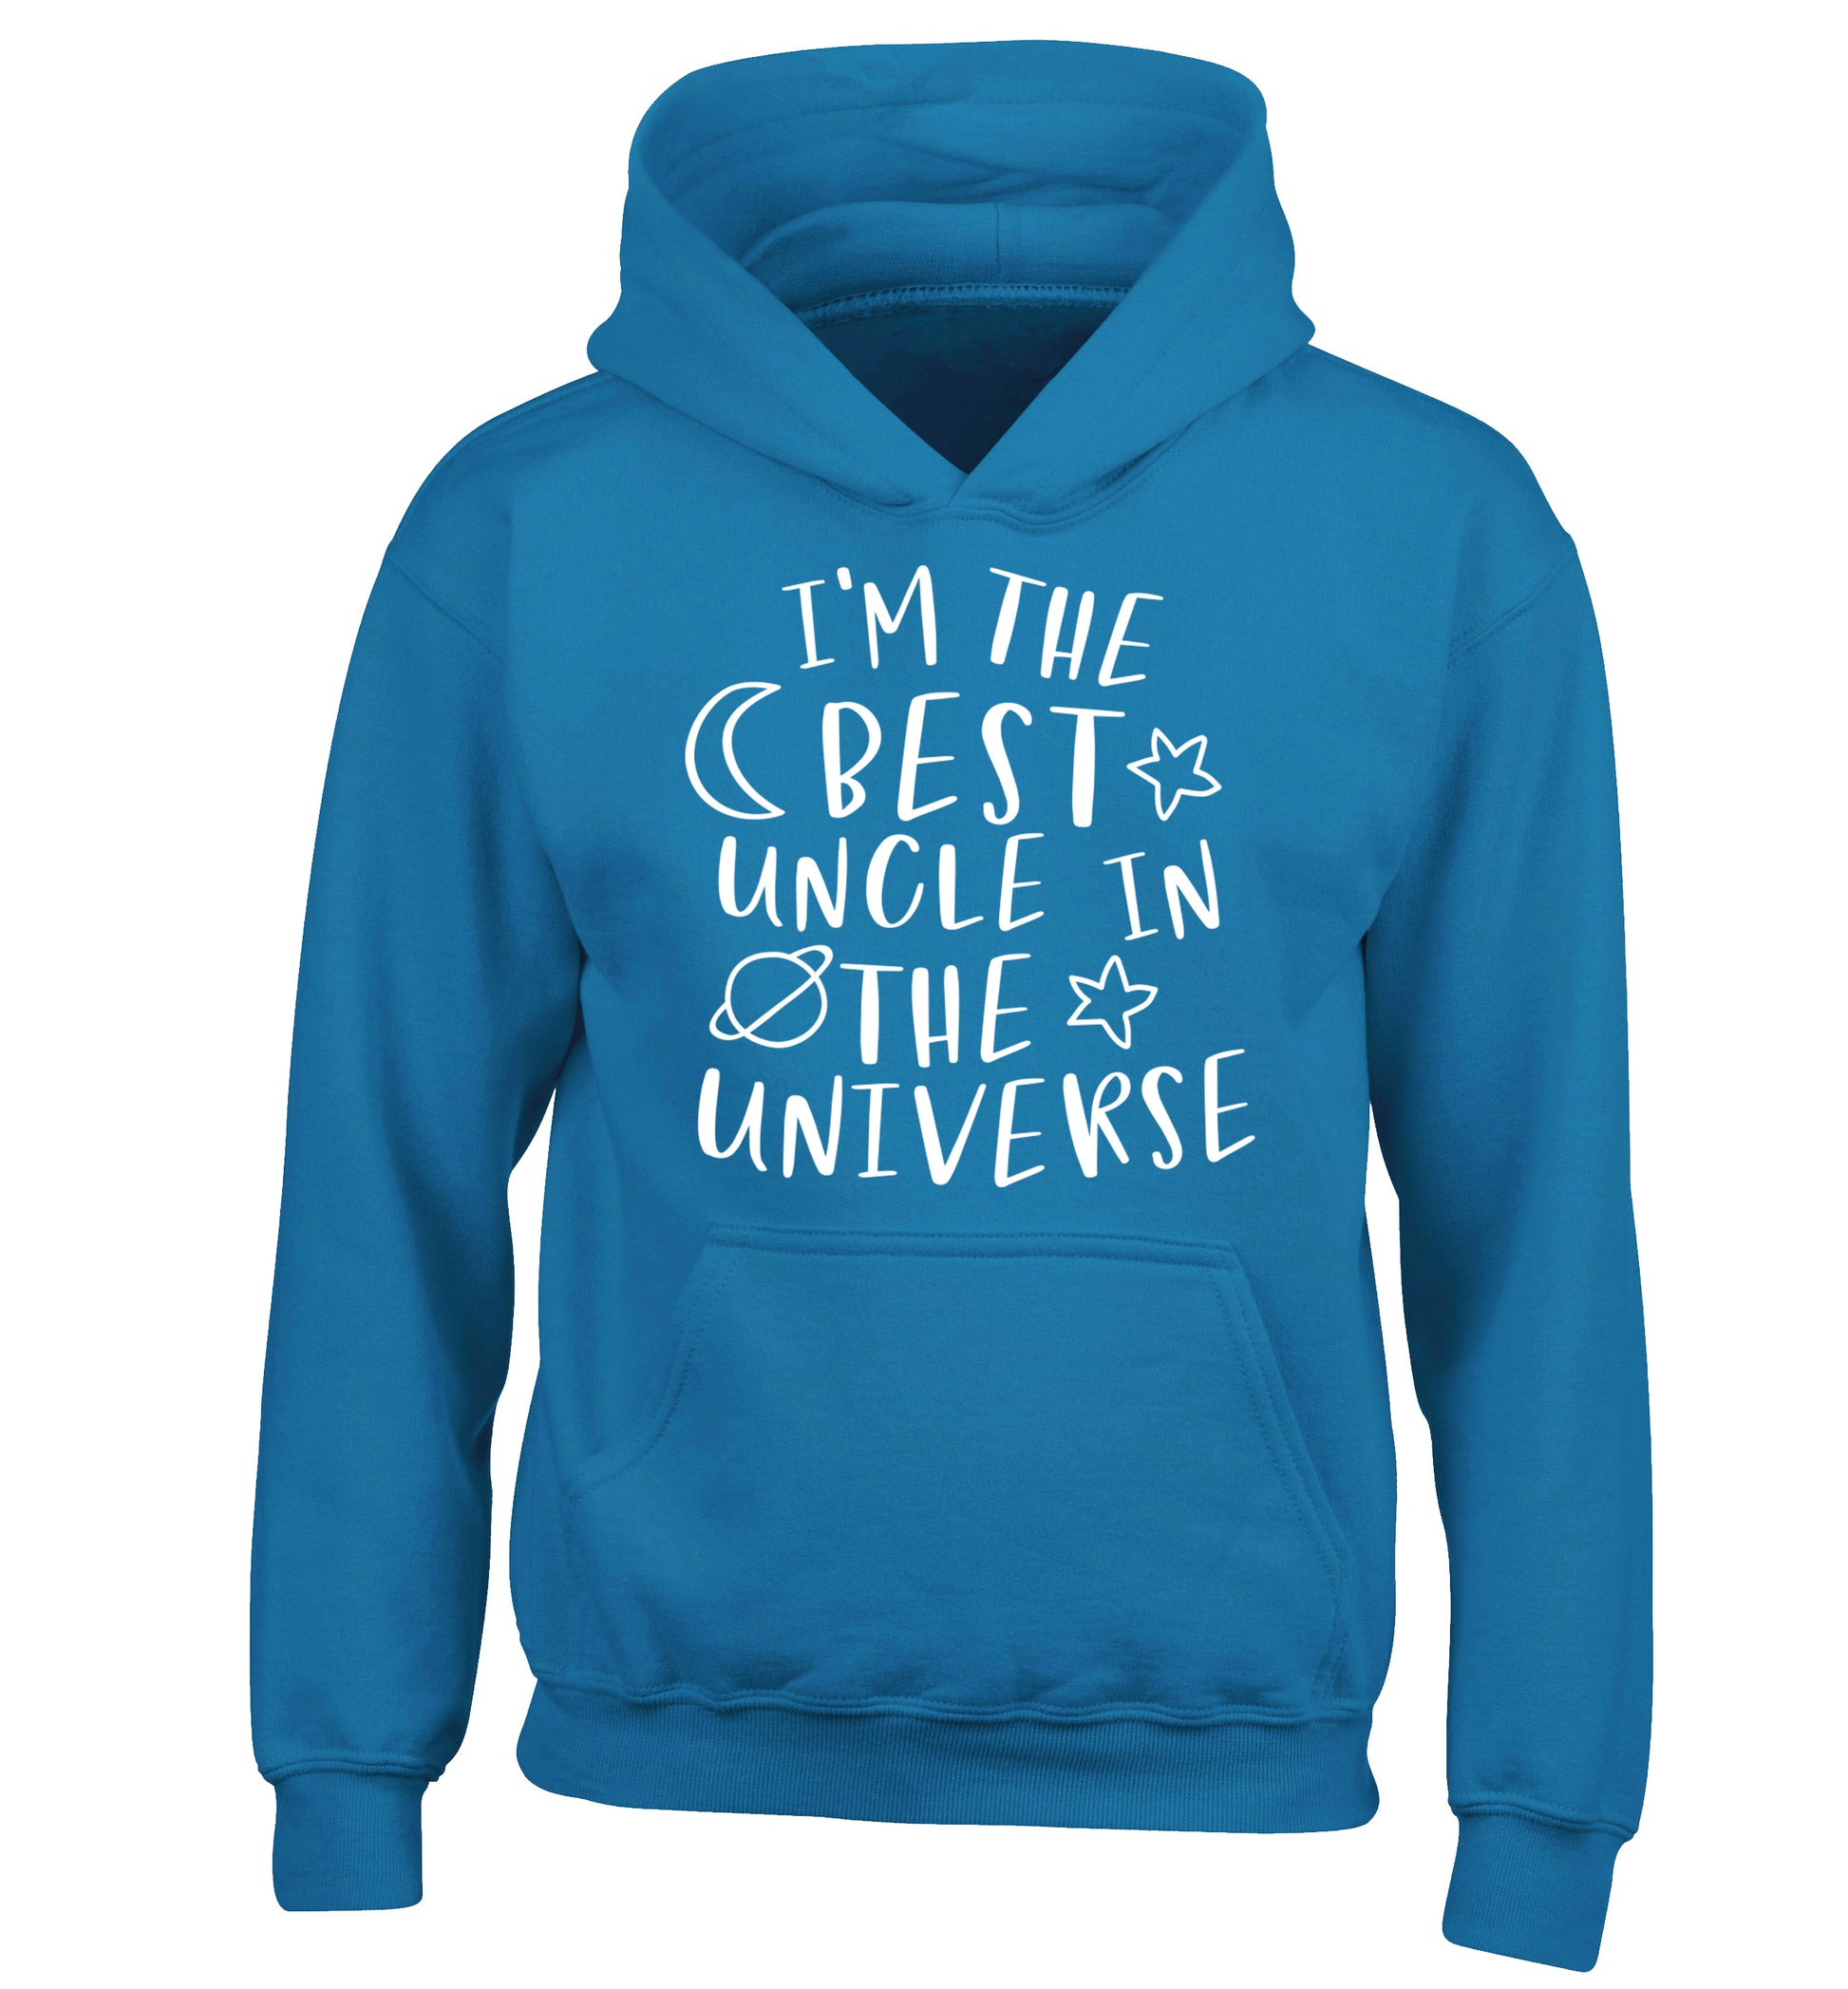 I'm the best uncle in the universe children's blue hoodie 12-13 Years